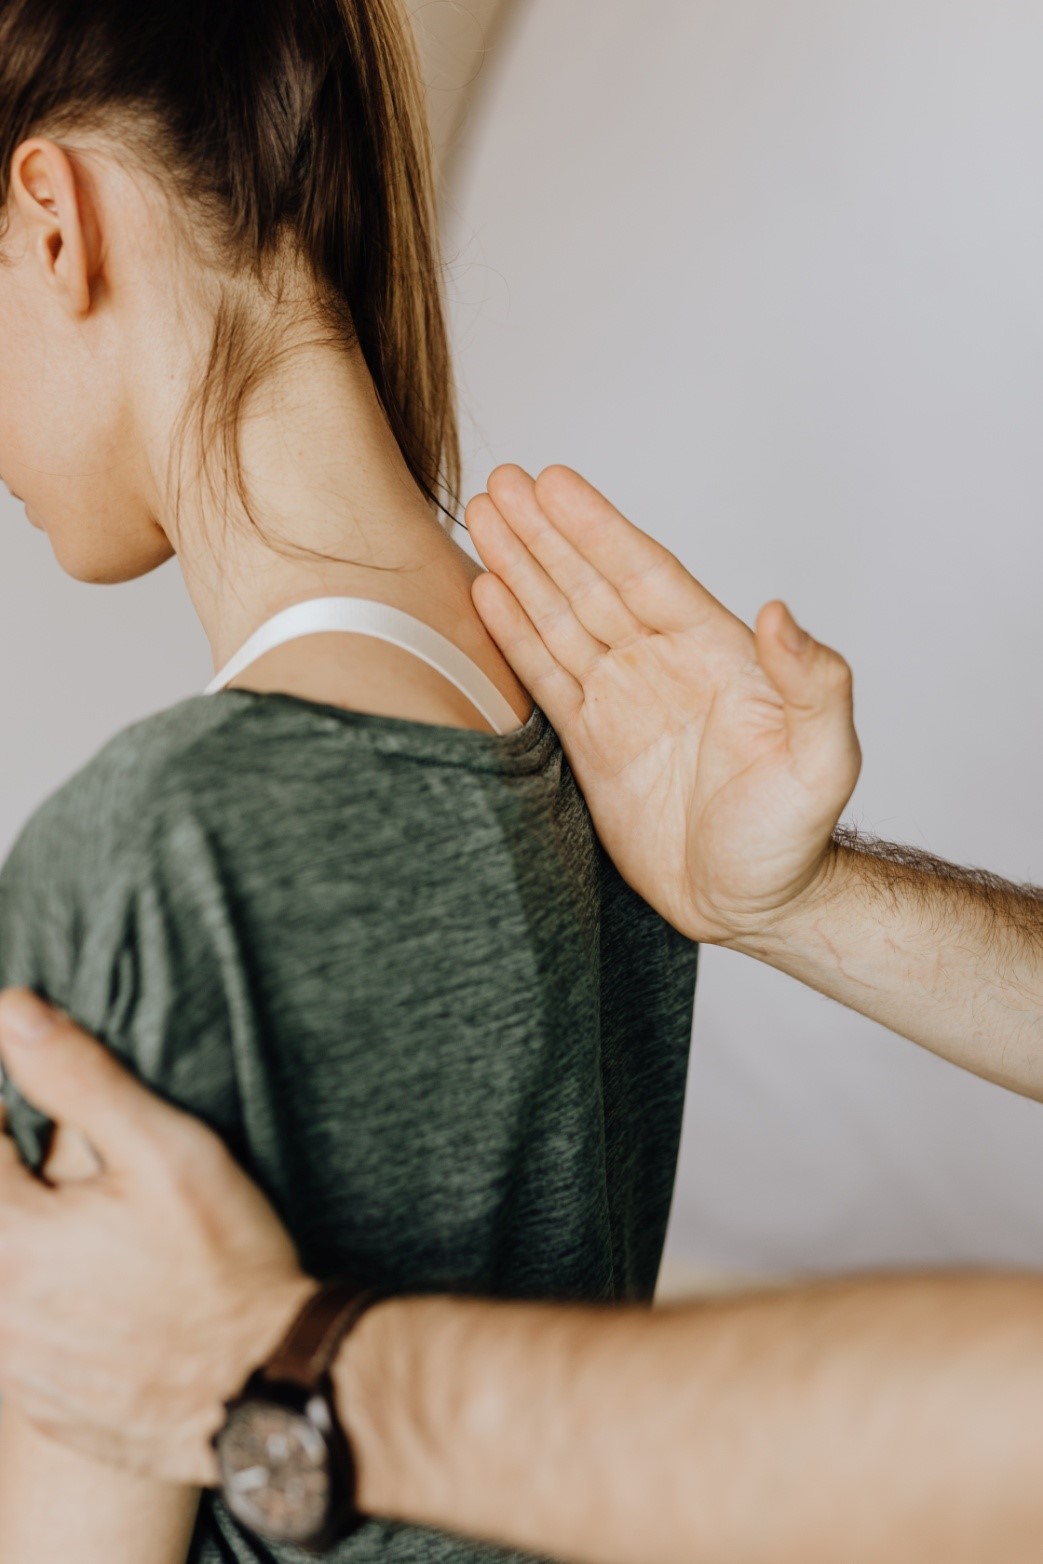 Chiropractor treating neck pain for a female patient